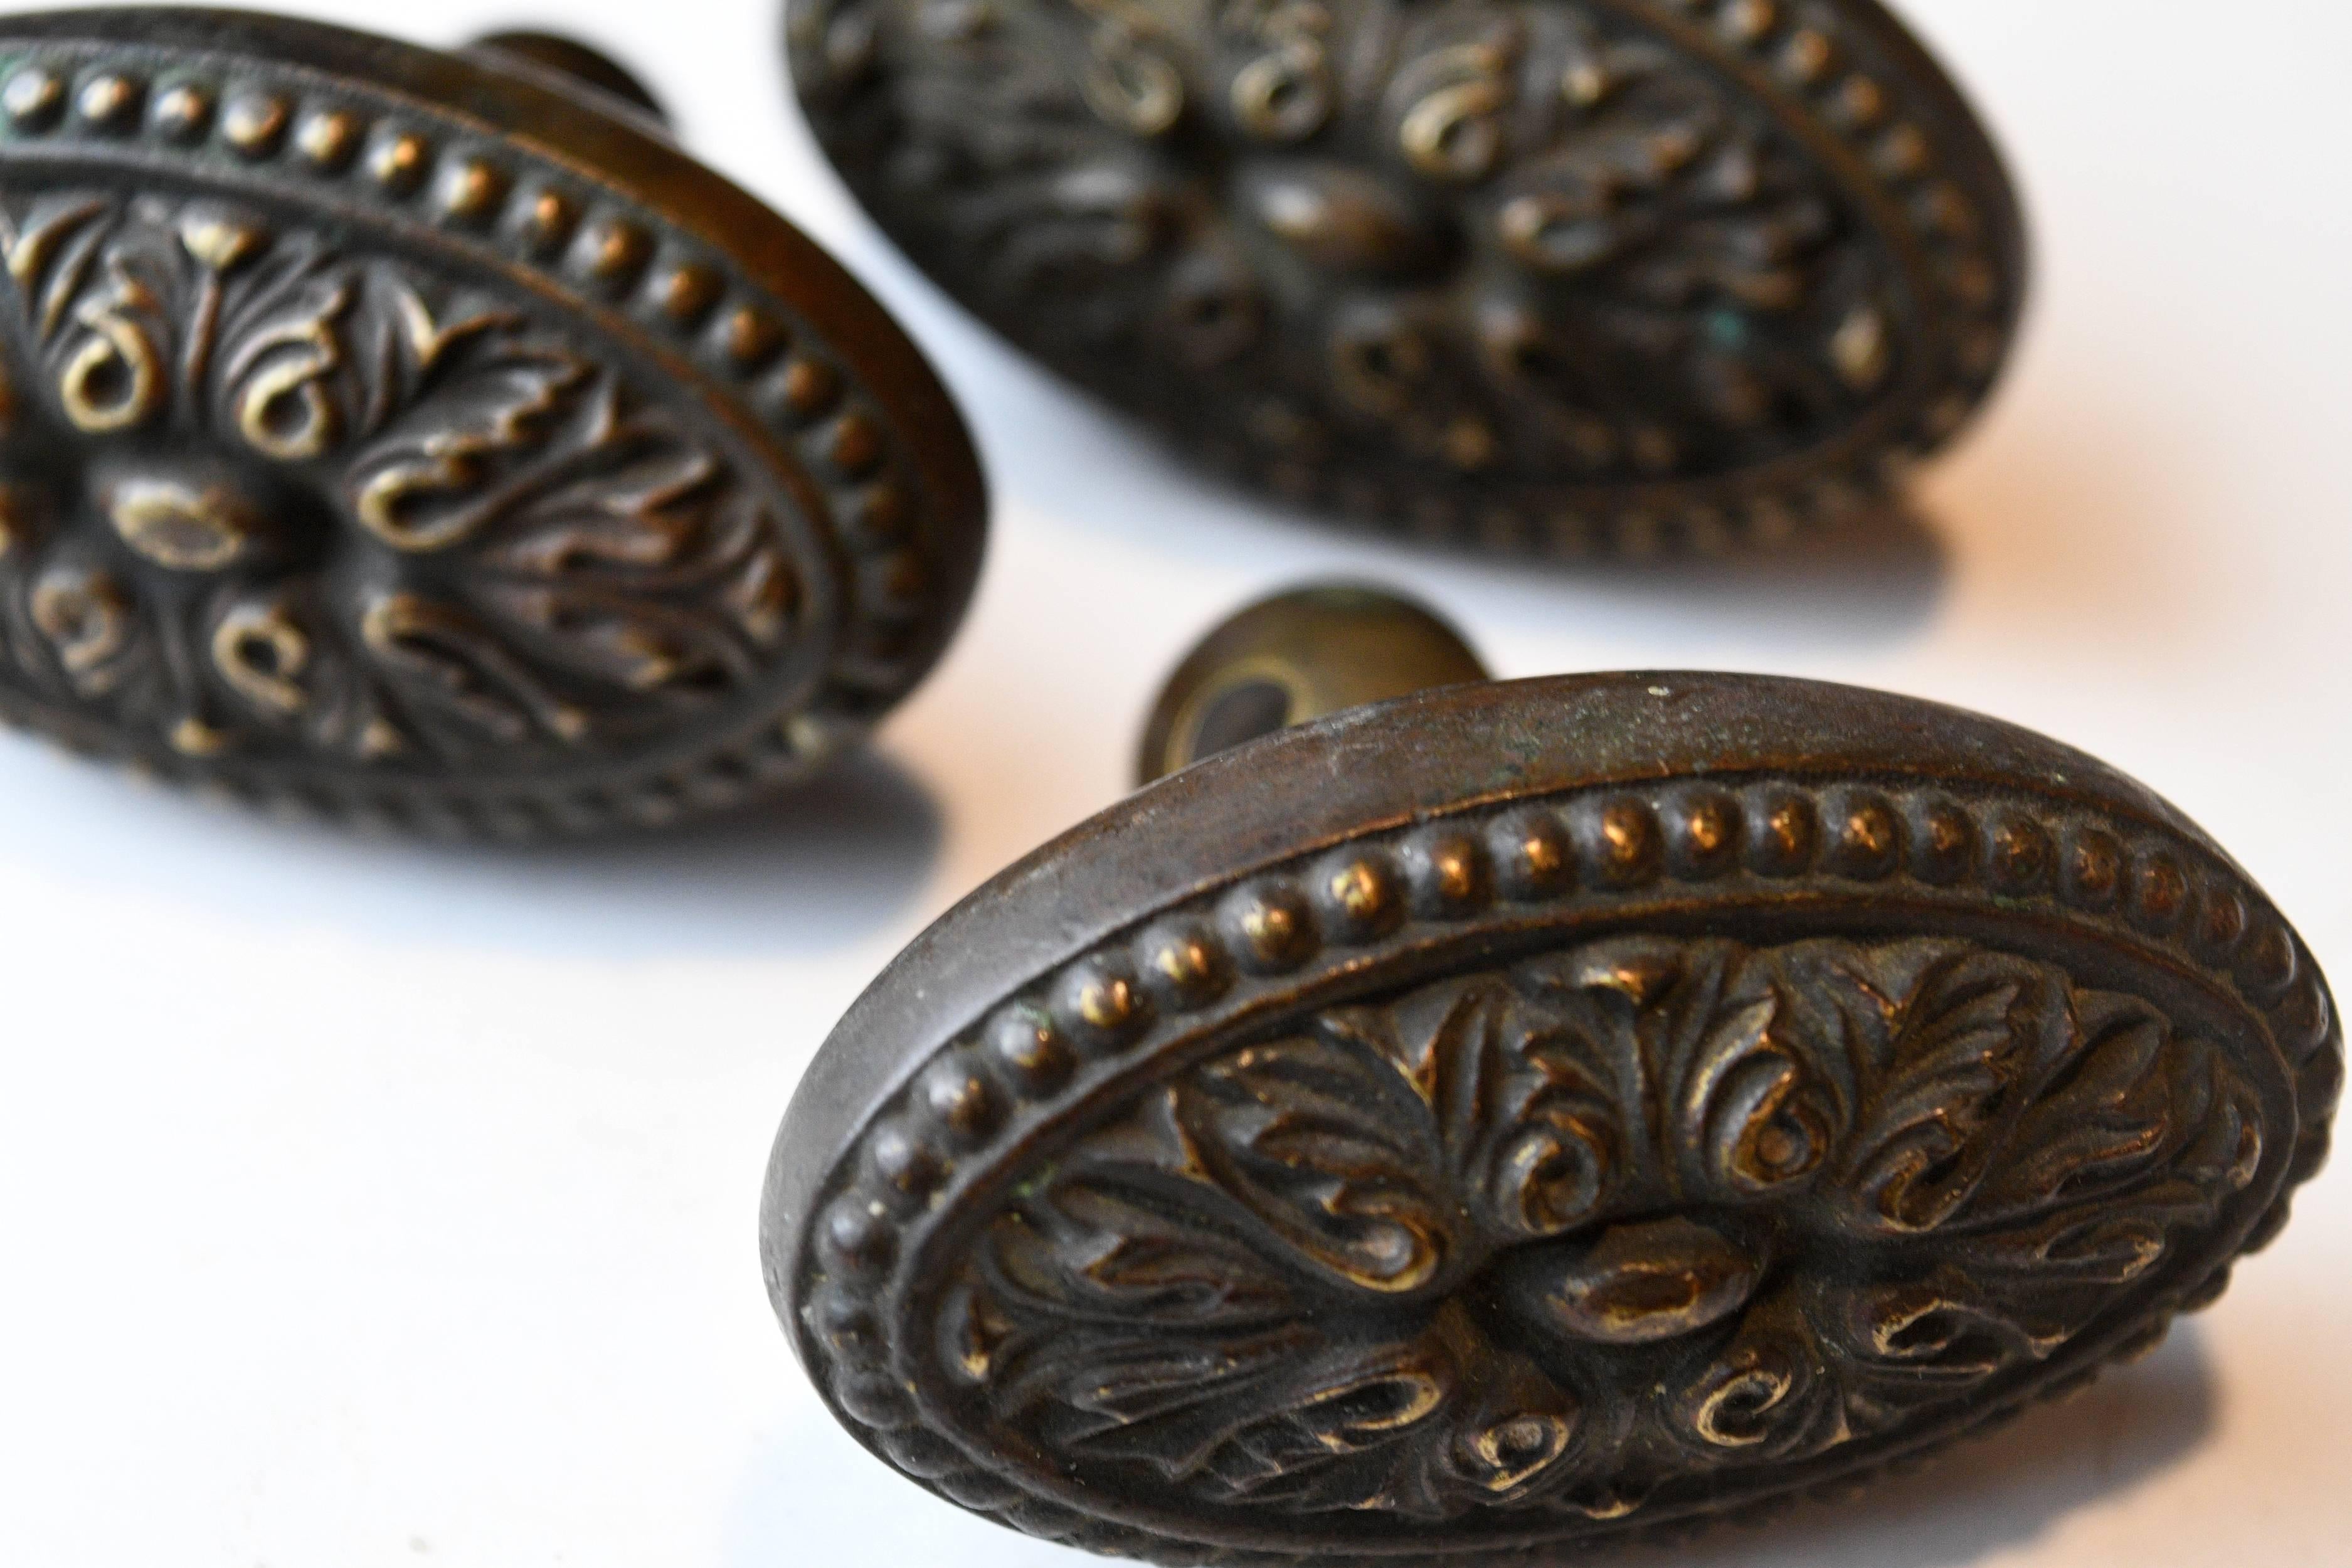 Small rococo style, elongated oval doorknobs. Decorated with curvy, leafy patterns.
3 available